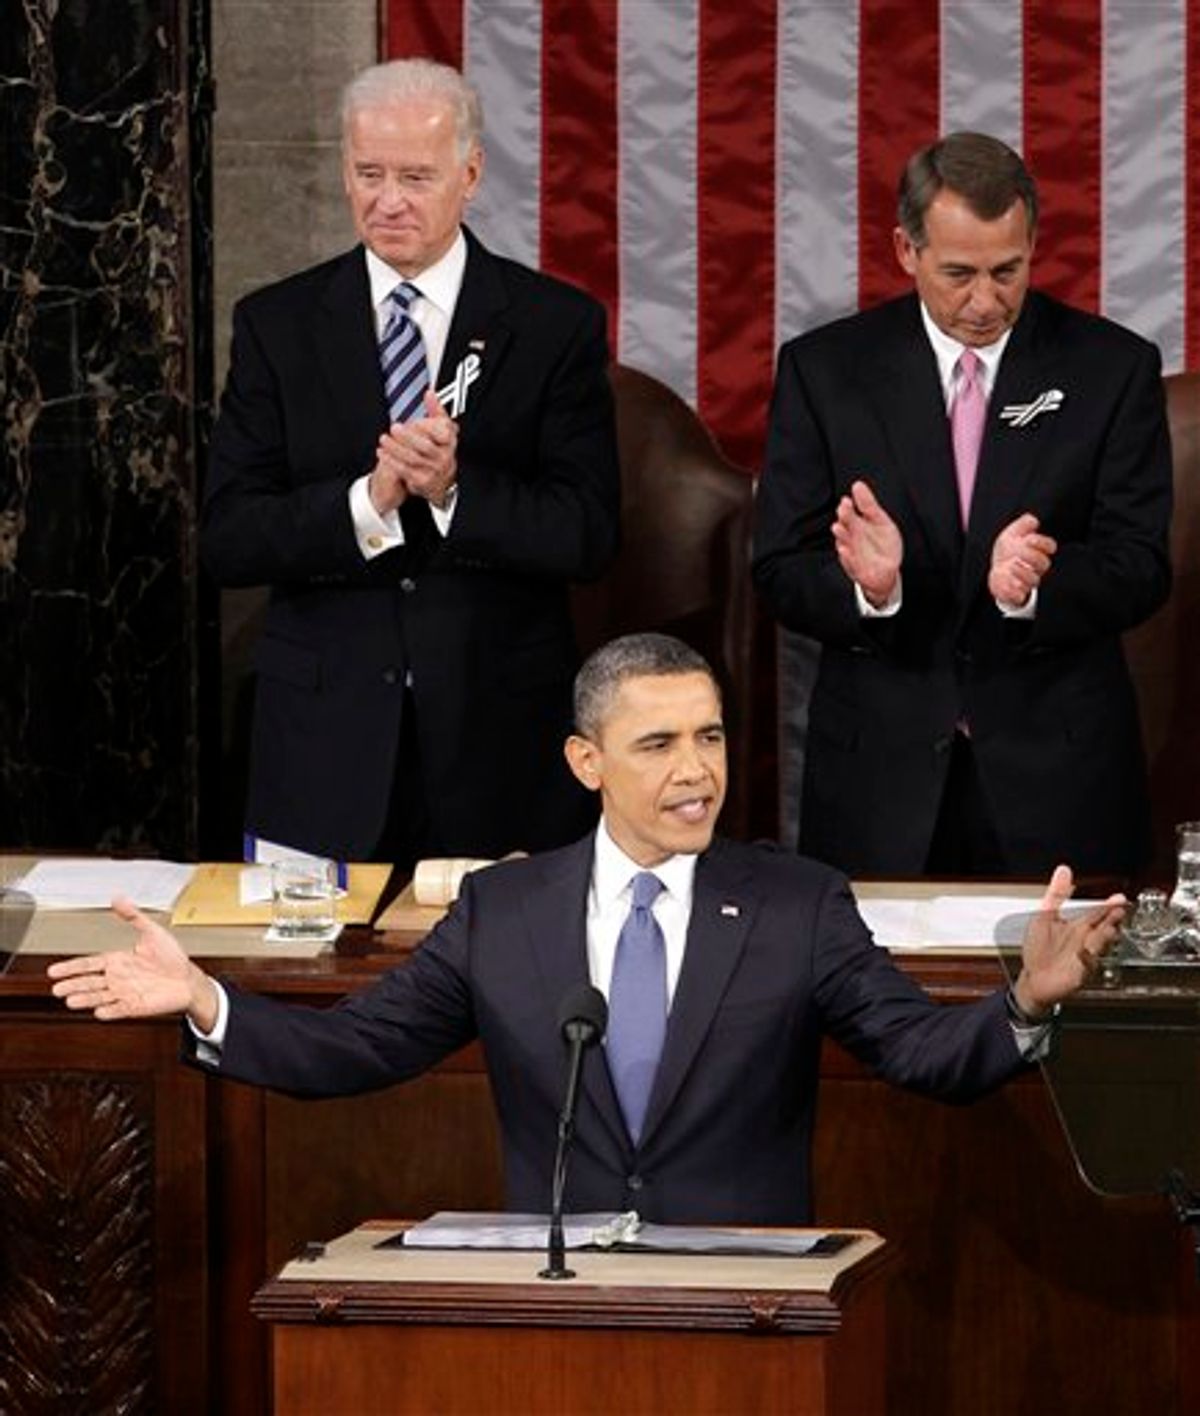 President Barack Obama gestures on Capitol Hill in Washington, Tuesday, Jan. 25, 2011, prior to delivering his State of the Union address in Washington, Tuesday, Jan. 25, 2011. Vice President Joe Biden and House Speaker John Boehner of Ohio applaud at rear. (AP Photo/Charles Dharapak) (AP)